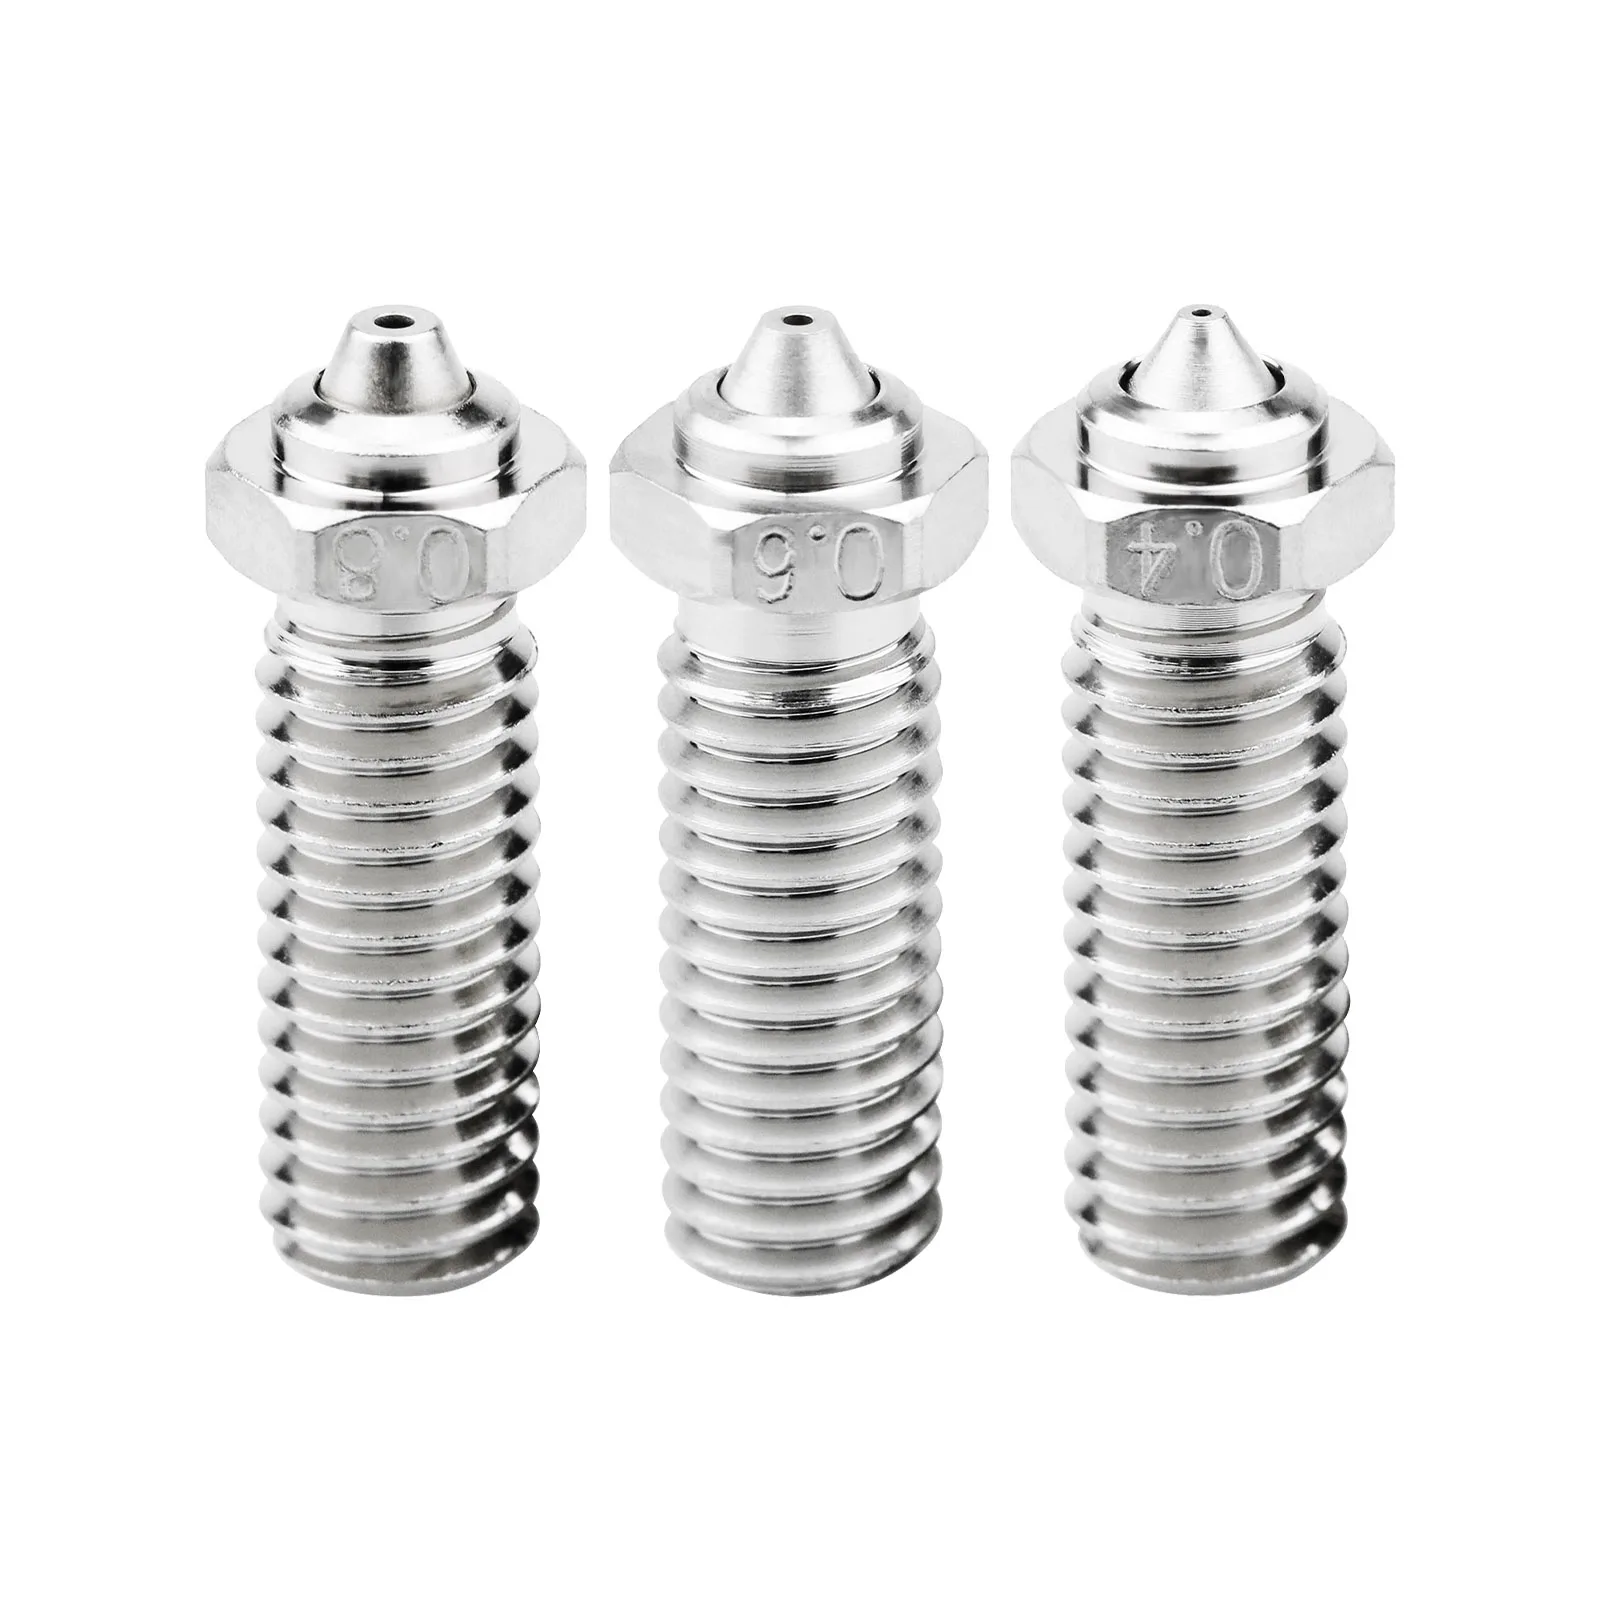 Volcano Bimetallic MY nozzle 3PCS High Temperature and Wear Resistant For Sidewinder X1& X2 Genius,Pro/Anycubic Vyper Artillery